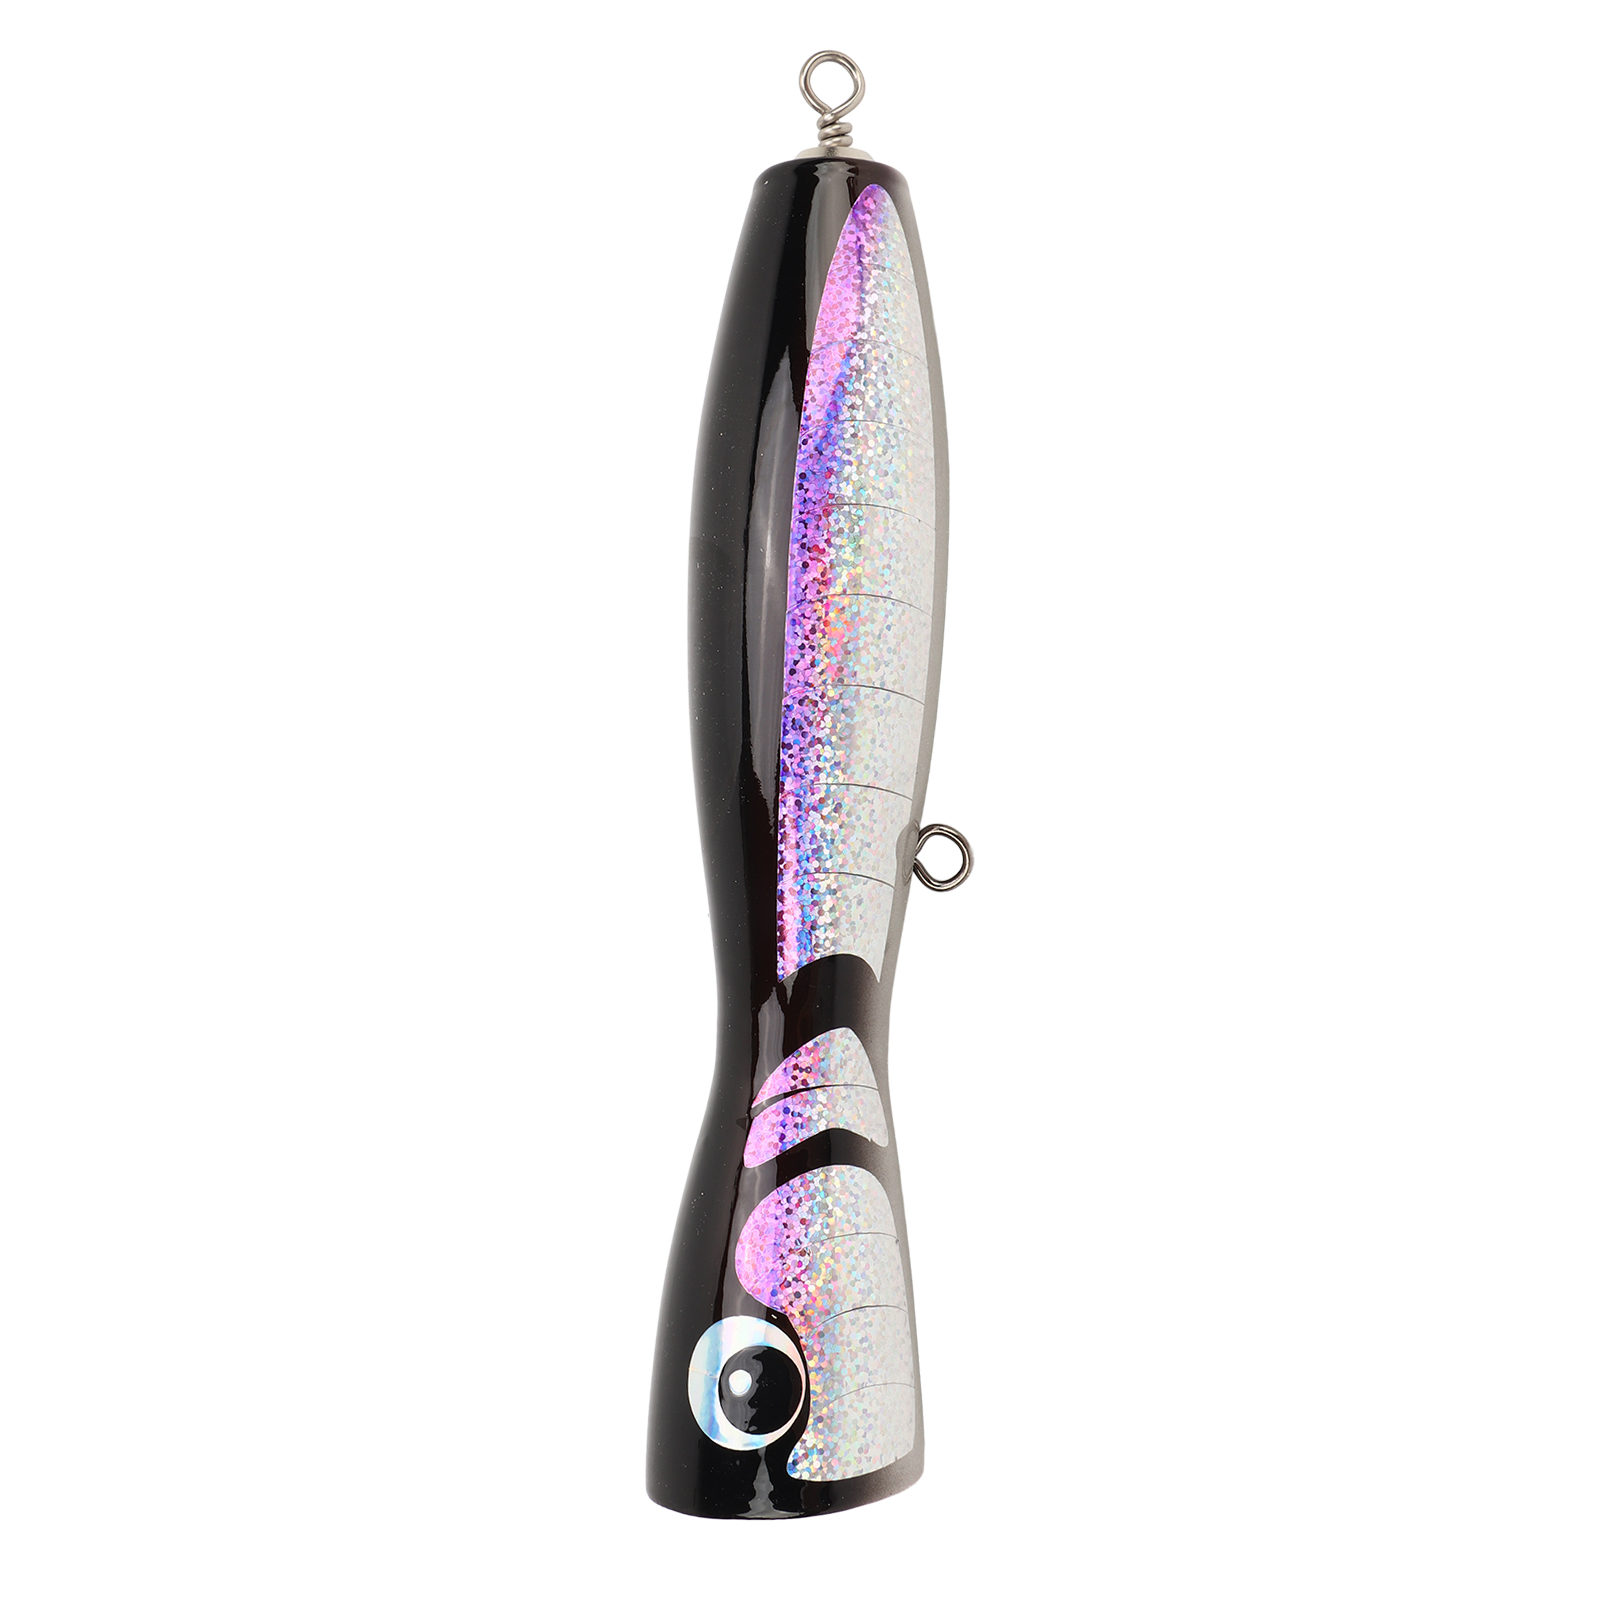 Saltwater Fishing Lures Linden Fishing Lures Strong Reflective for